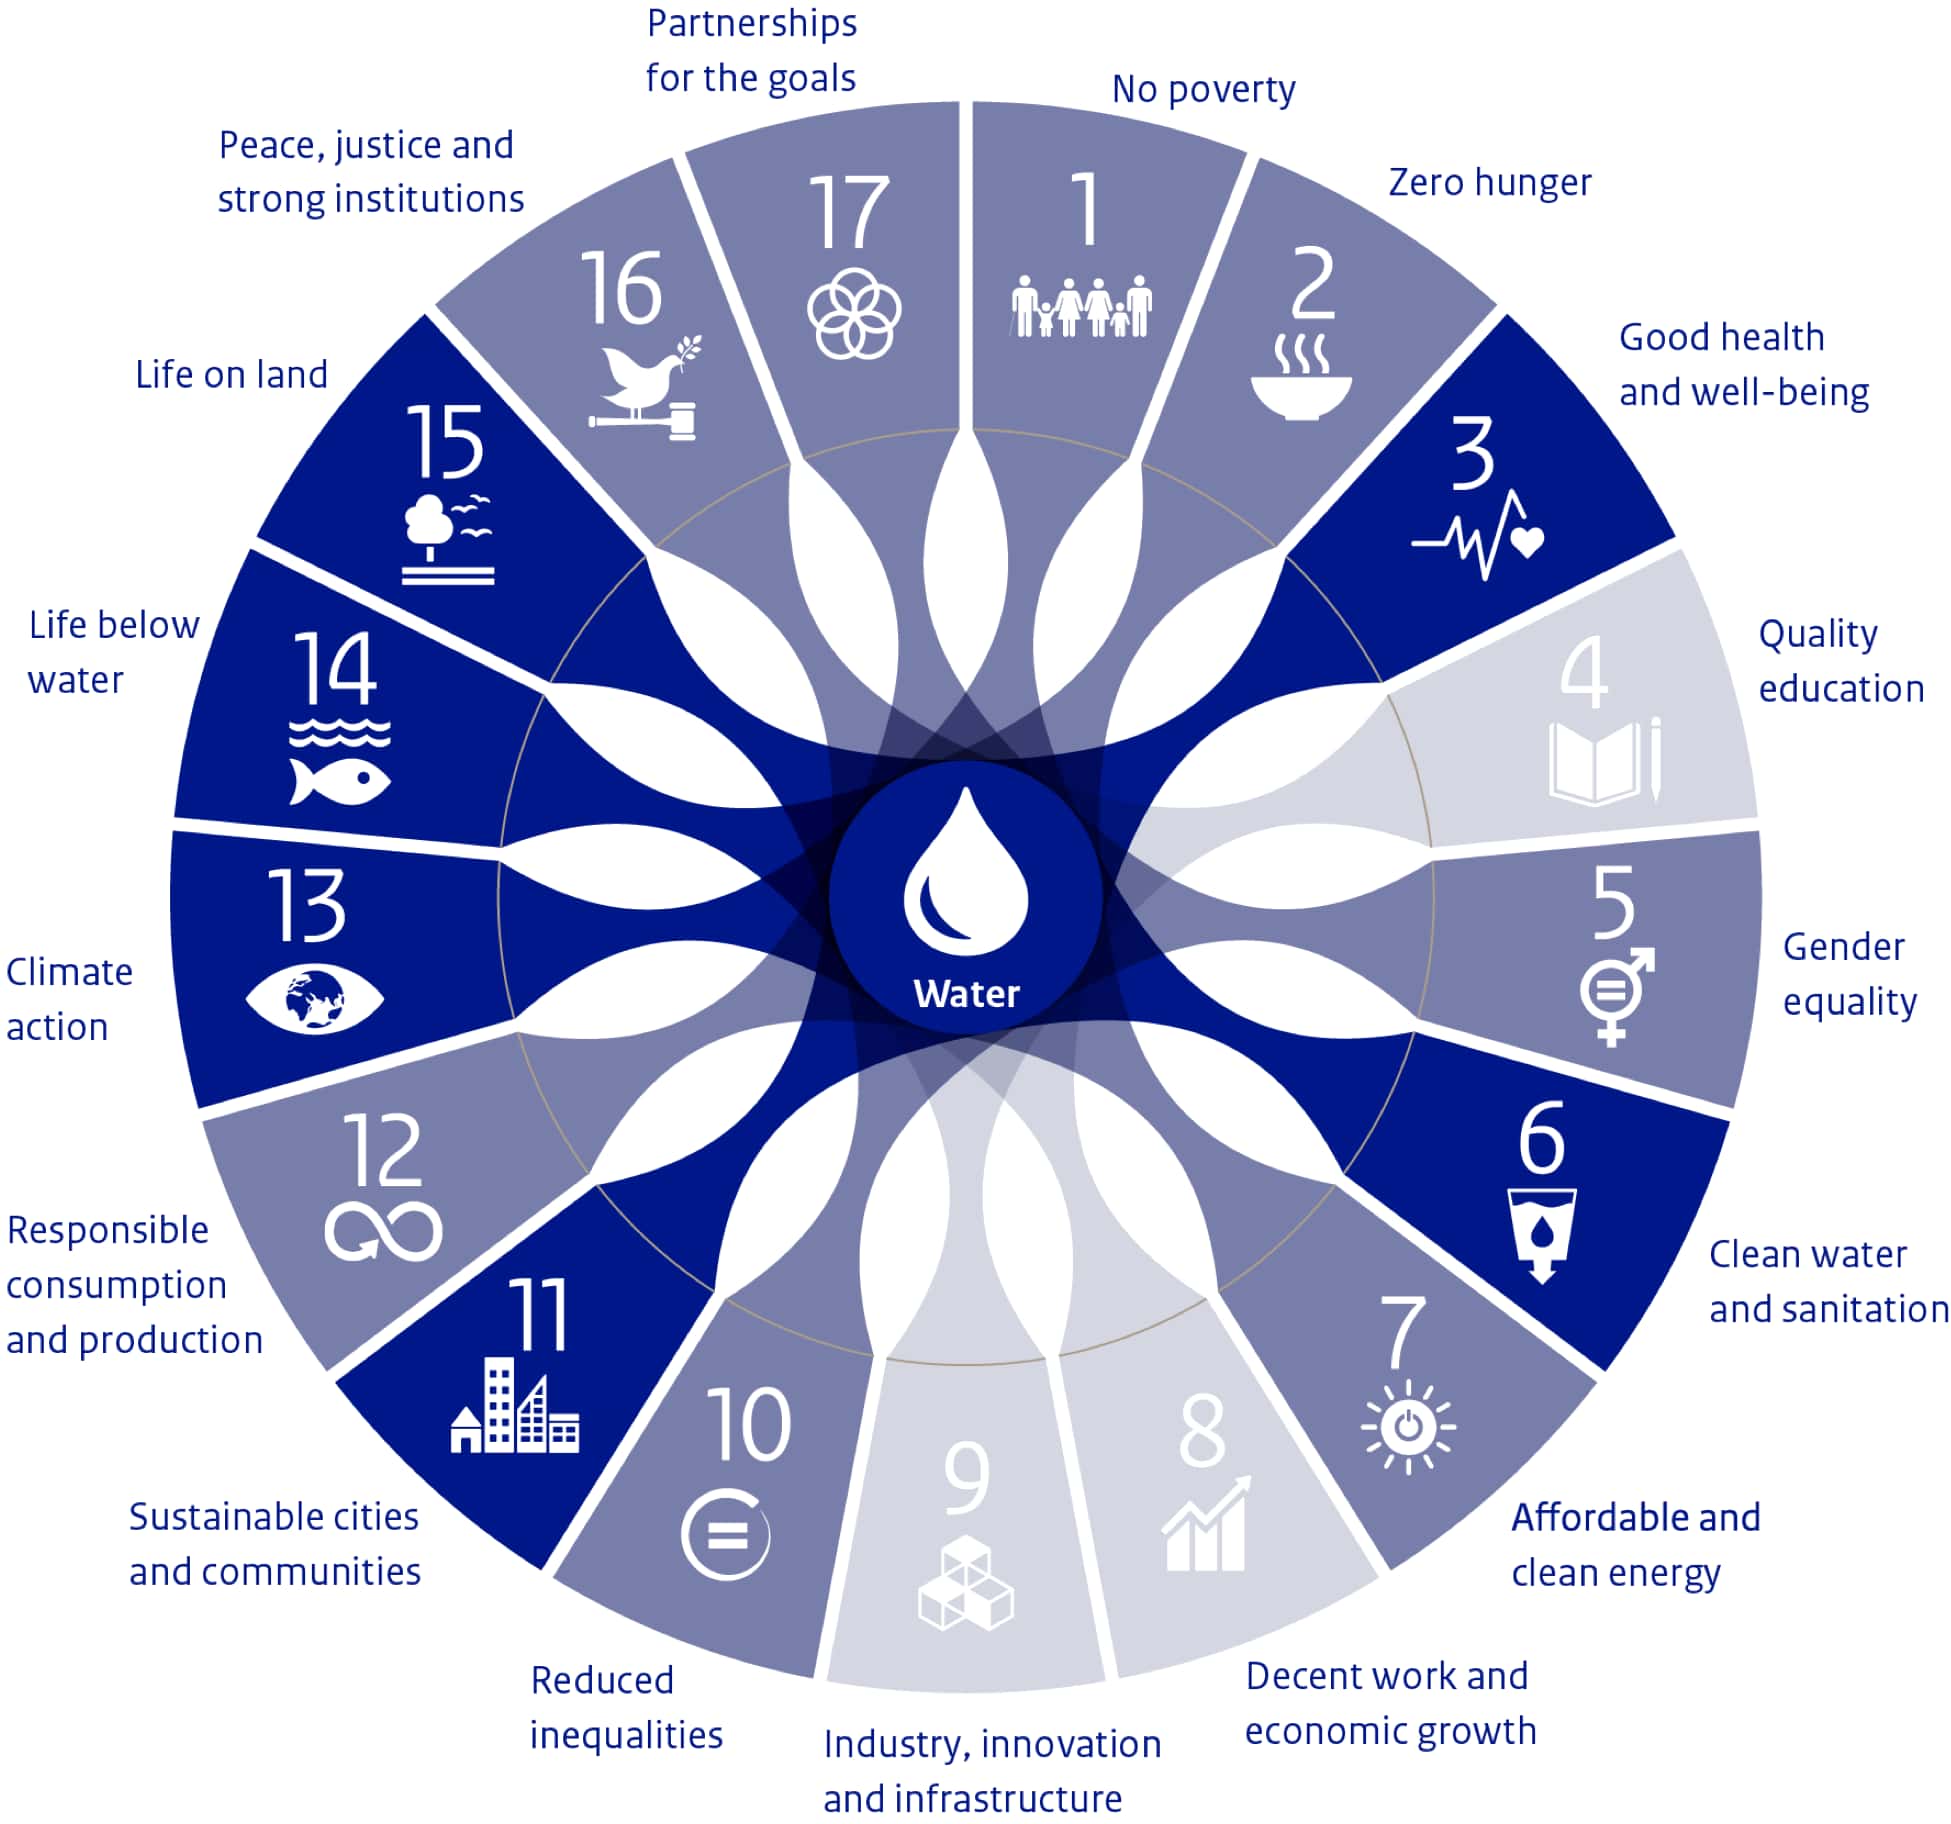 Water is linked to all SDGs - directly or indirectly. The figure illustrates three groups of SDGs that are 1) strongly related to water, 2) related to water or 3) indirectly related to water